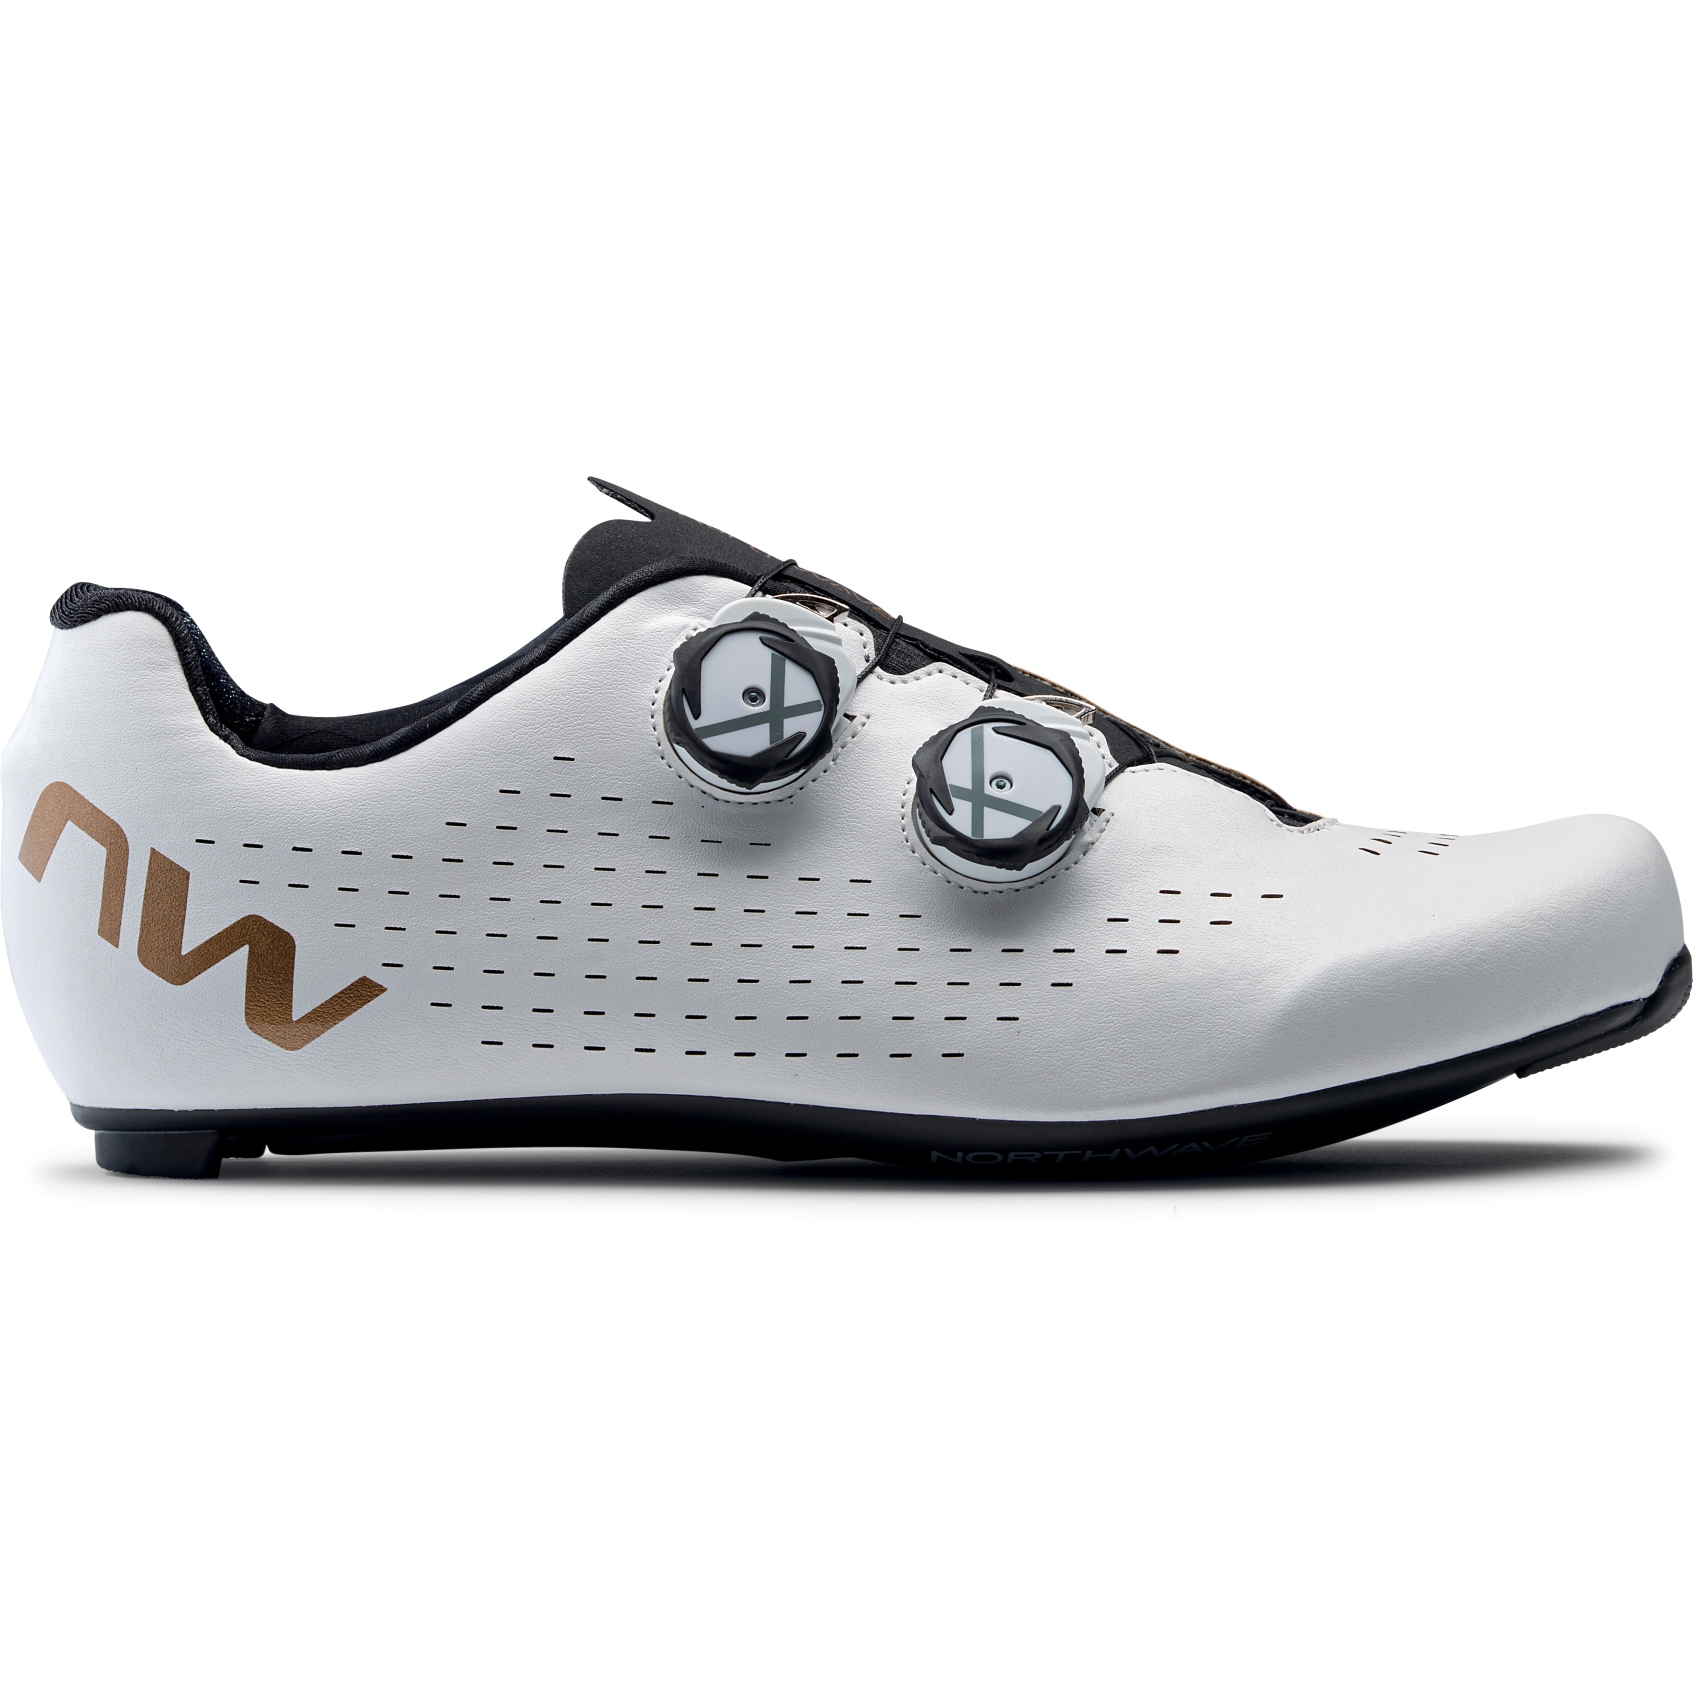 Picture of Northwave Revolution 3 Road Shoes - white/bronze 55